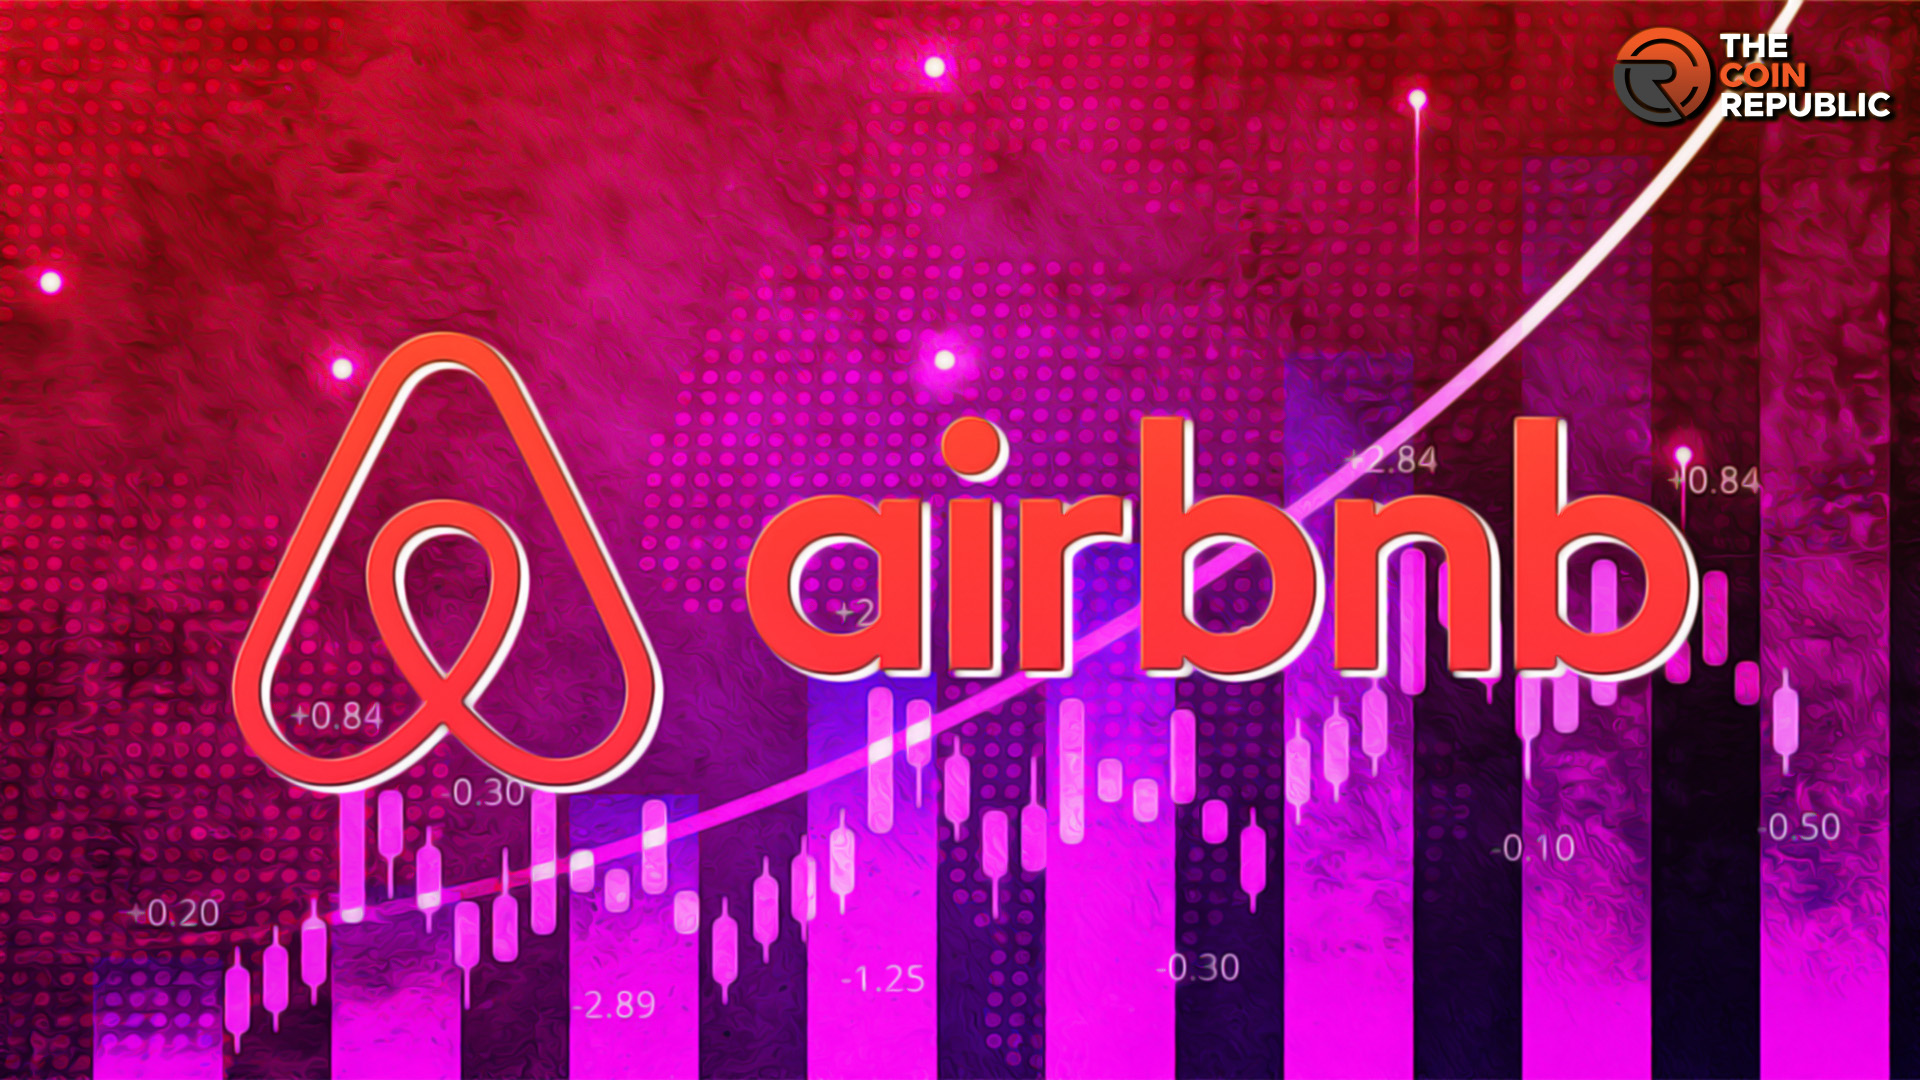 Airbnb Stock Price Prediction: Are You Selling or Holding ABNB?